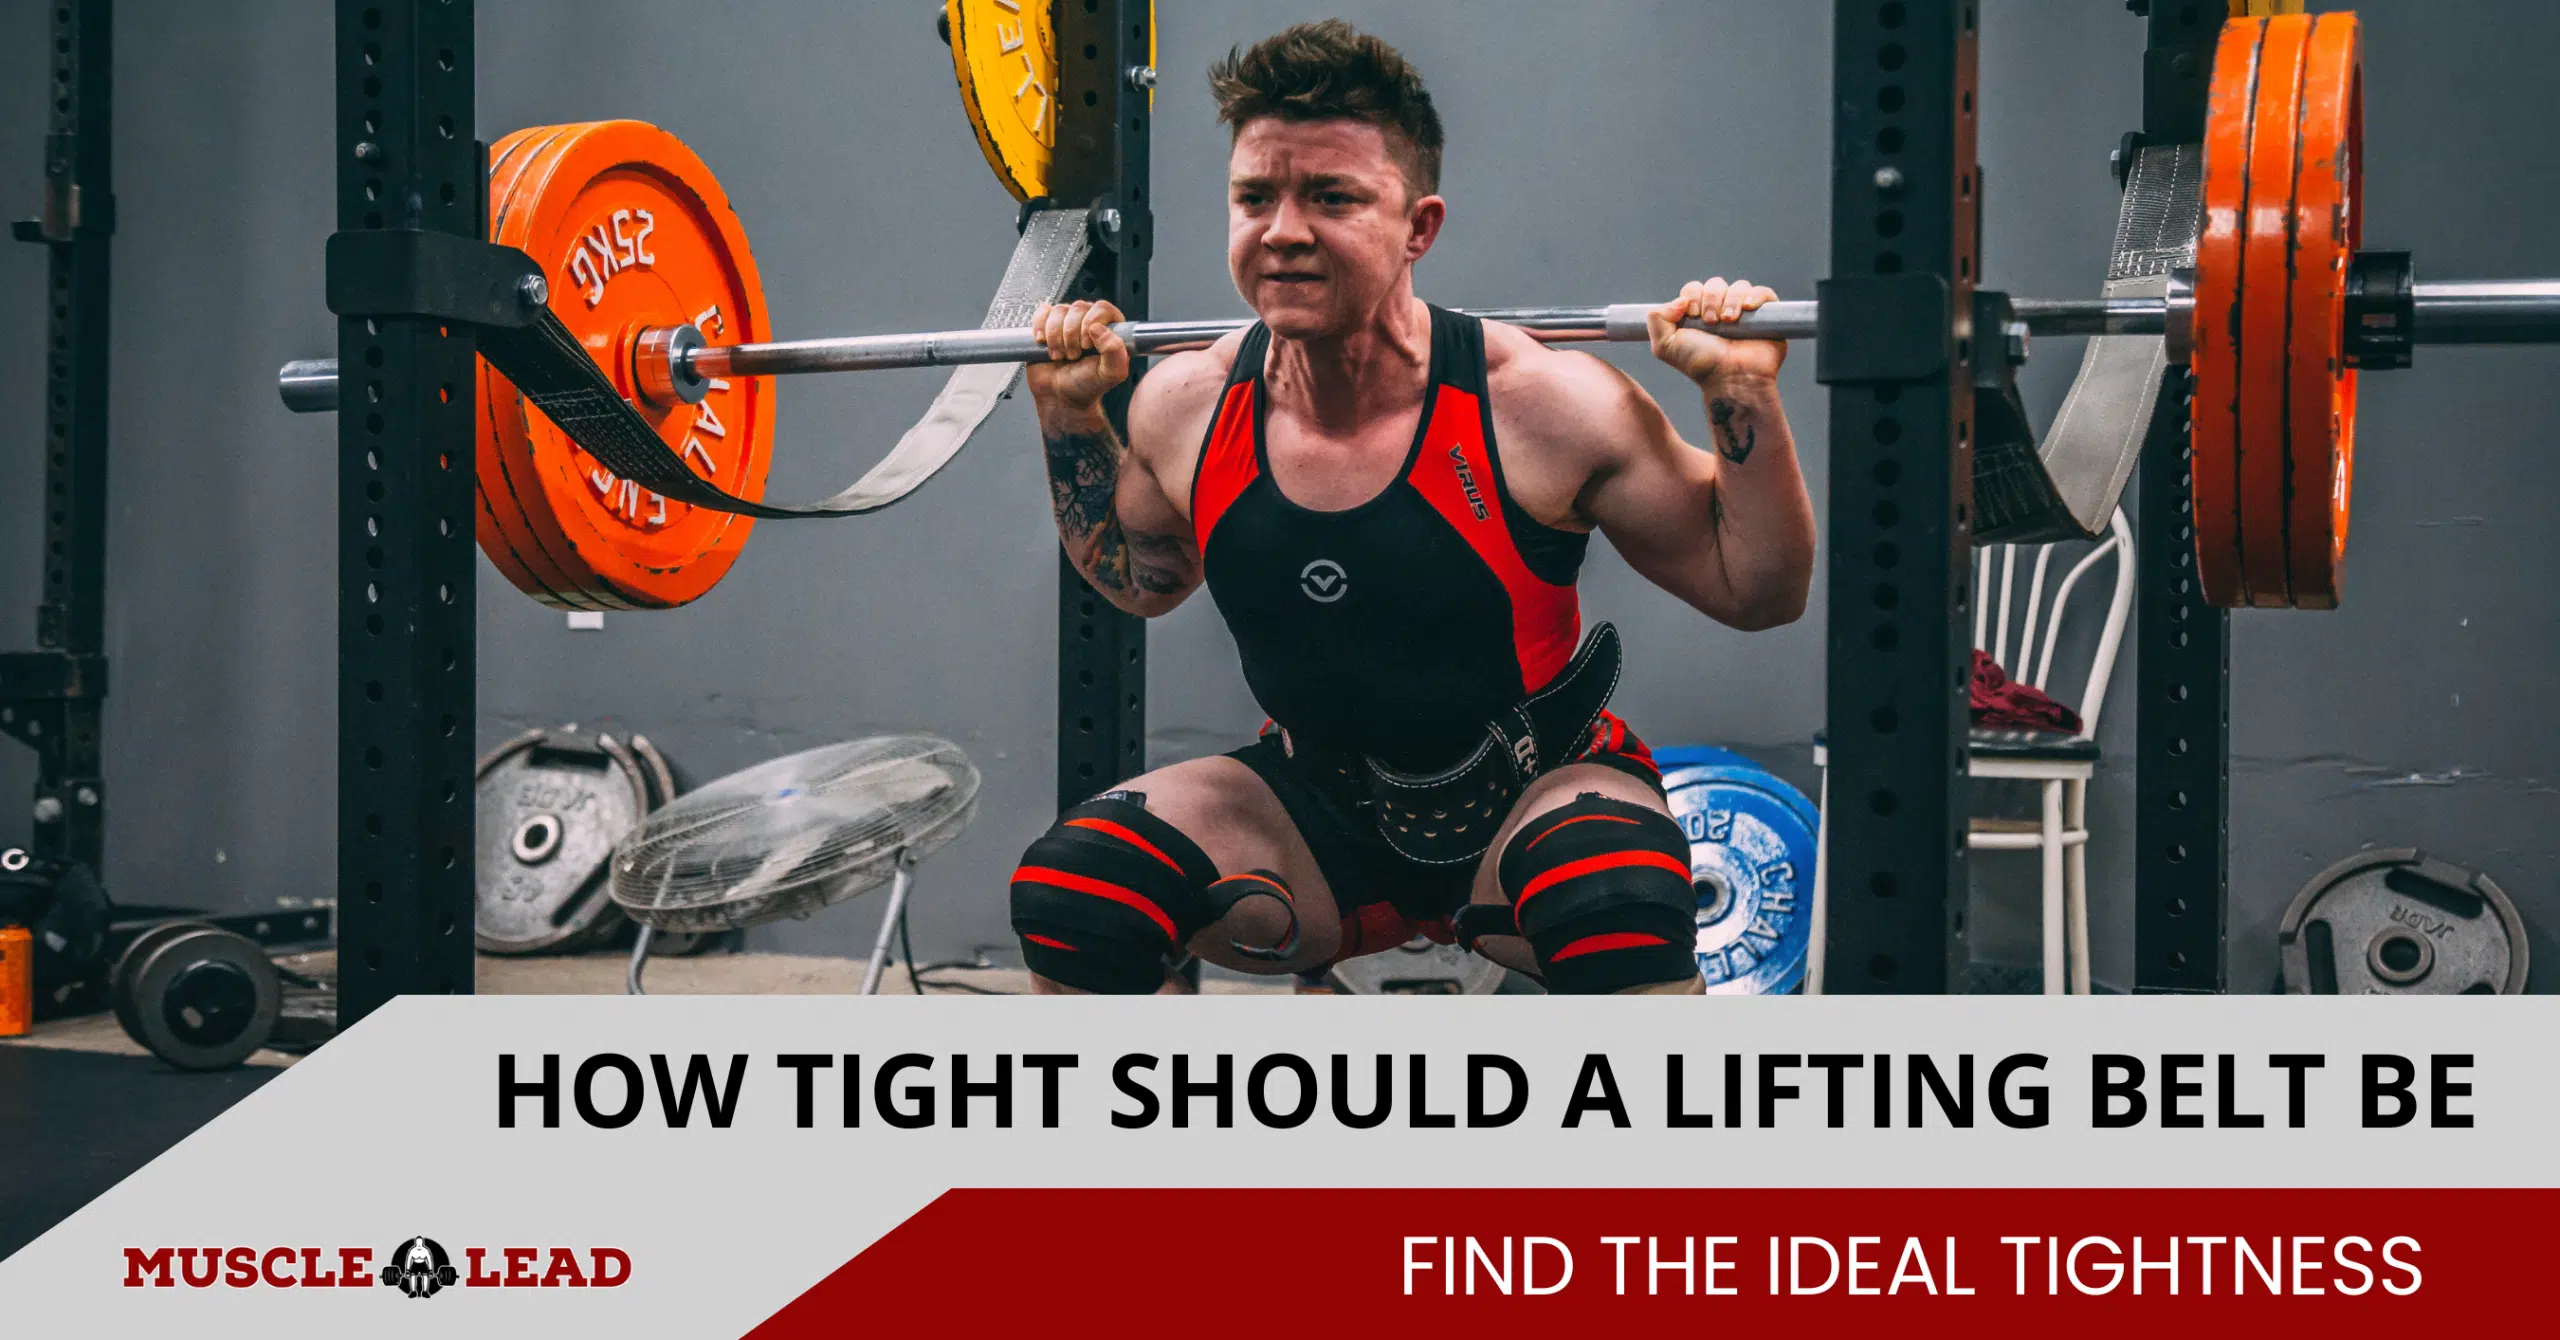 A male lifter lifting weights and the text in photo 'how tight should a lifting belt be'